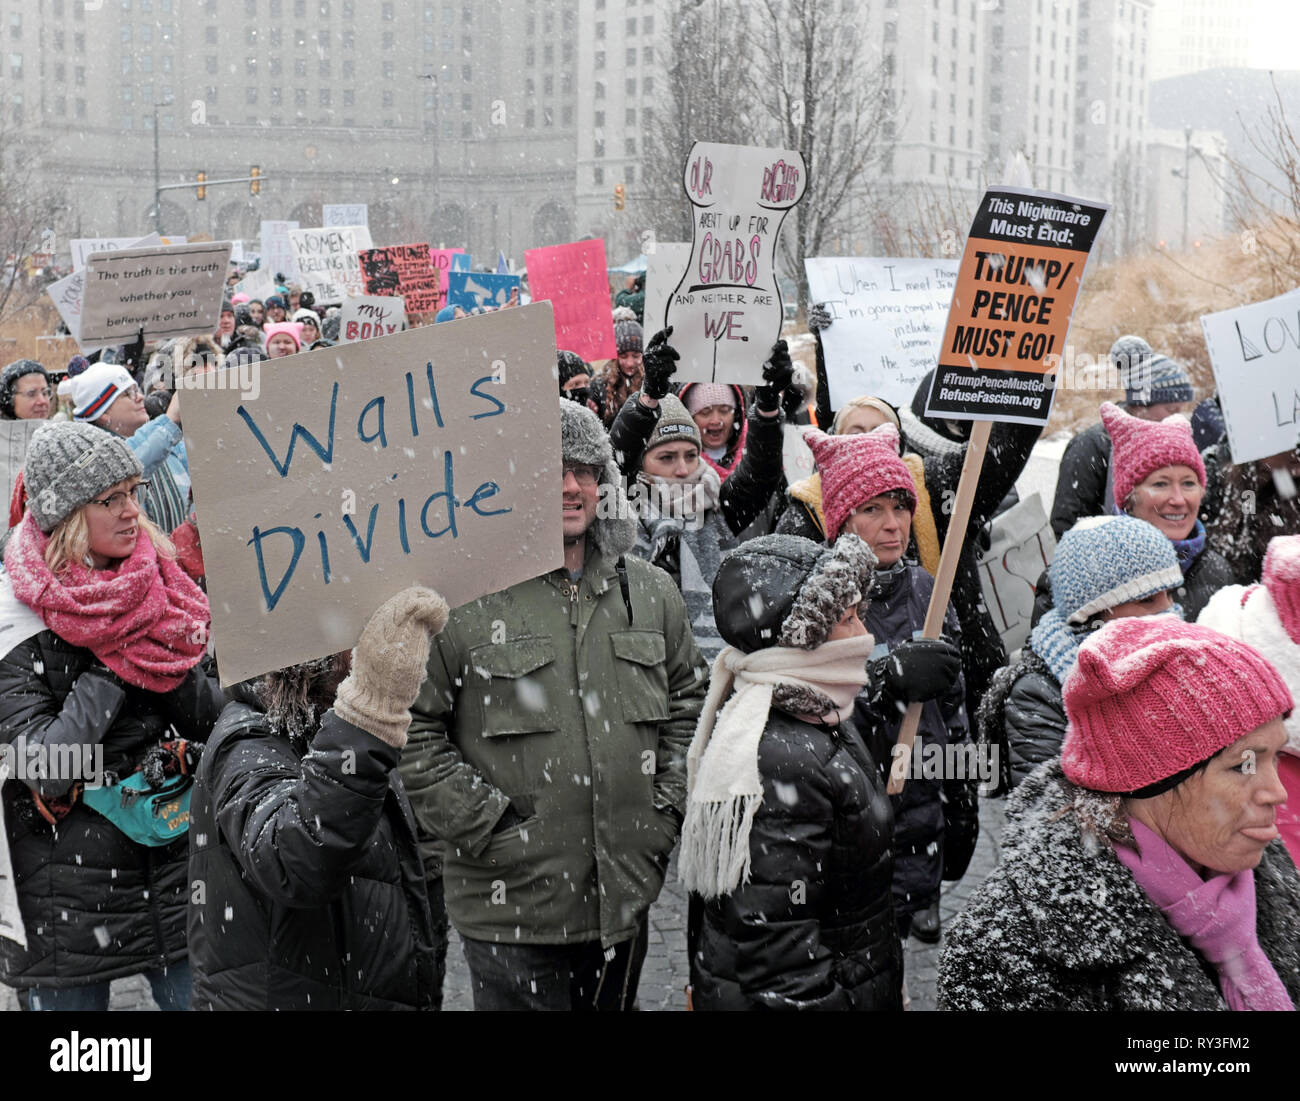 2019 Women's March participants hold signs including 'Walls Divide' as they march through a snowstorm in Public Square in Cleveland, Ohio, USA. Stock Photo